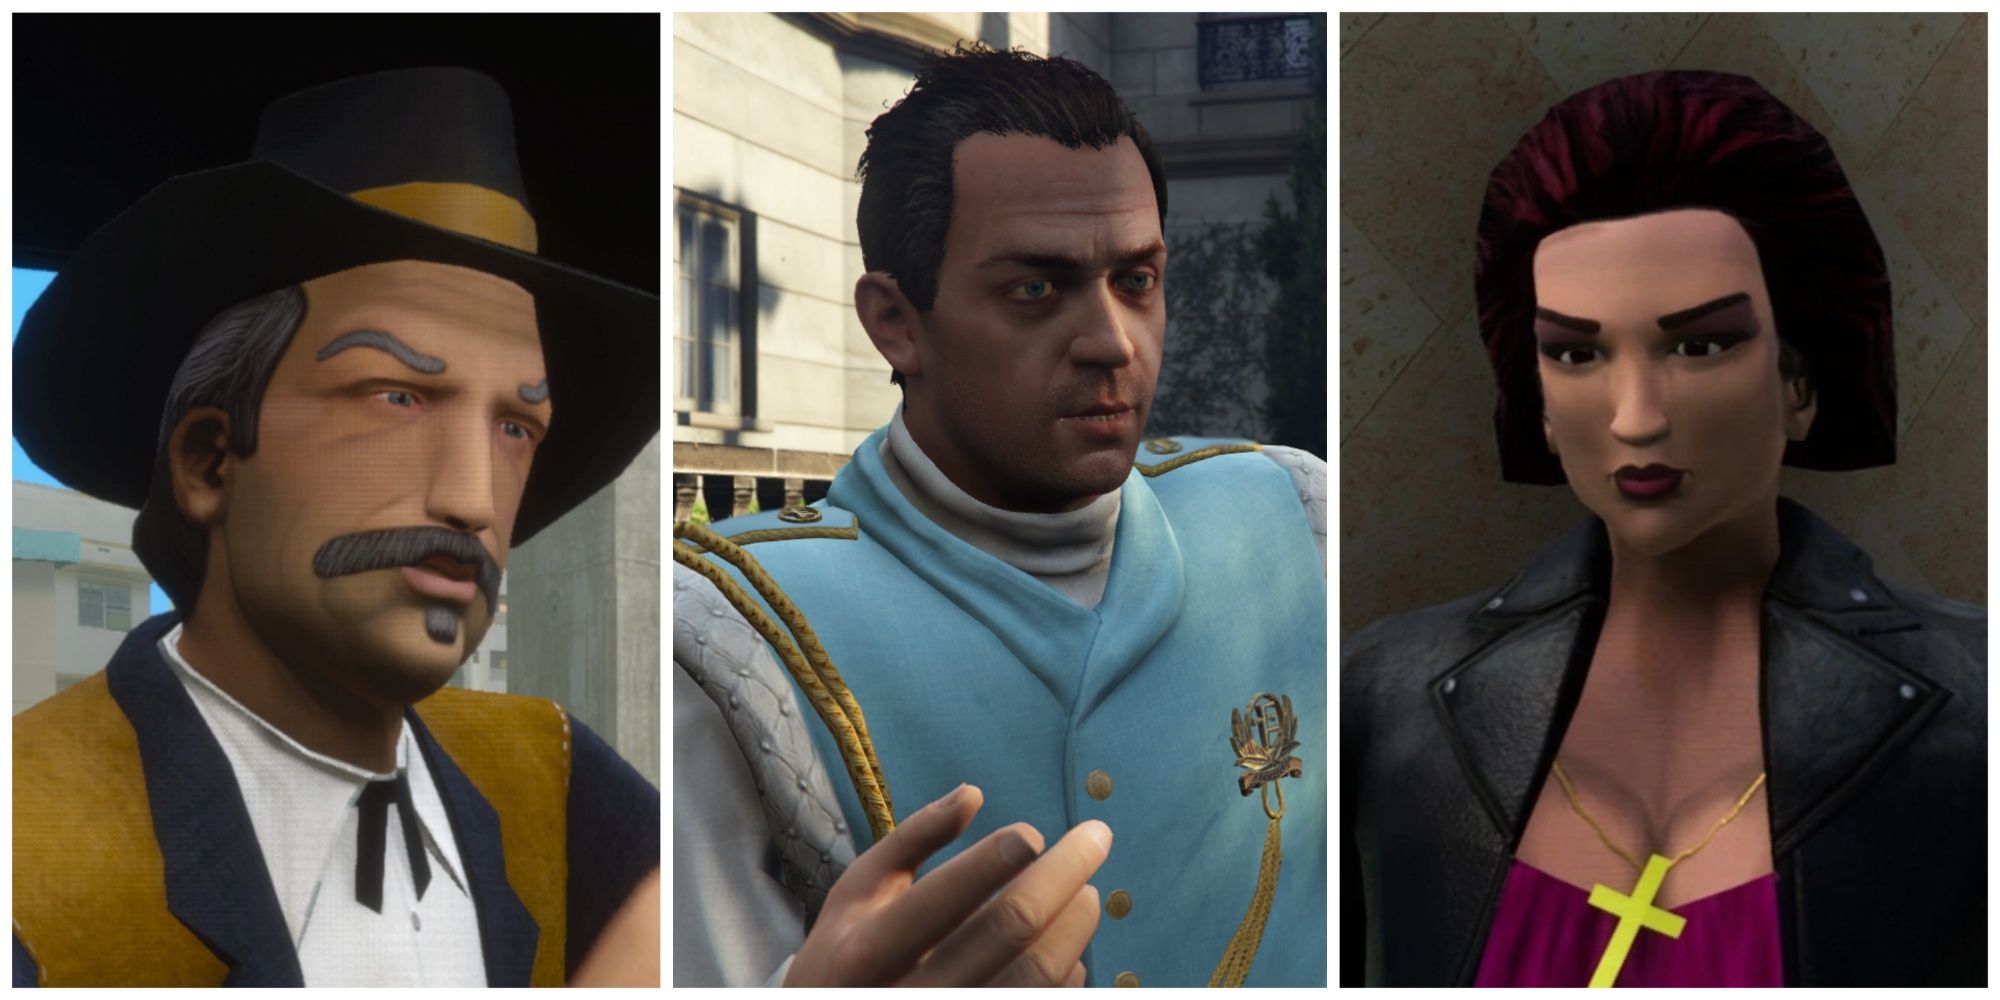 Avery Carrington (VC); Cris Formage (Various Games); Mercedes Cortez (VC) are all voiced by famous actors